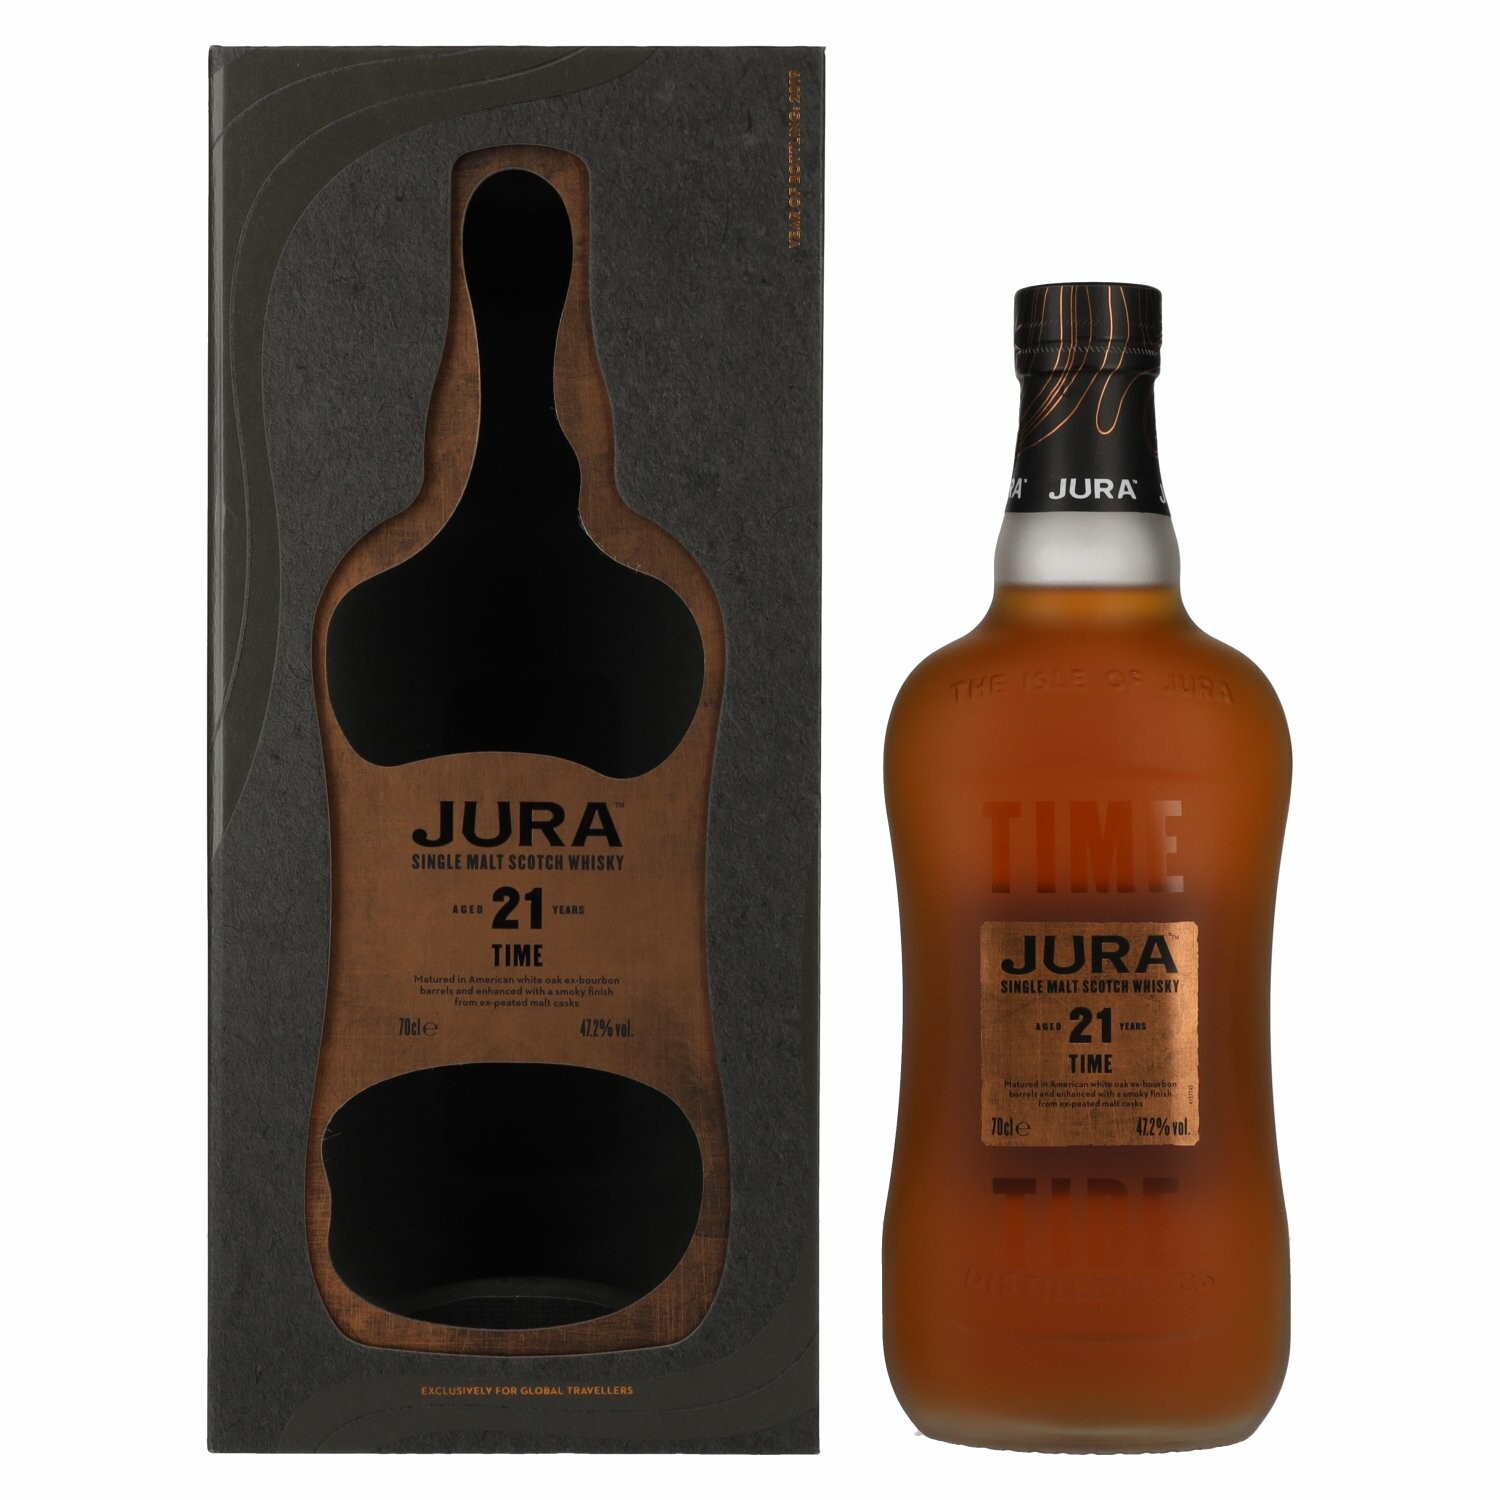 Jura 21 Years Old TIME & Tide Single Malt Scotch Whisky 47,2% Vol. 0,7l in Giftbox